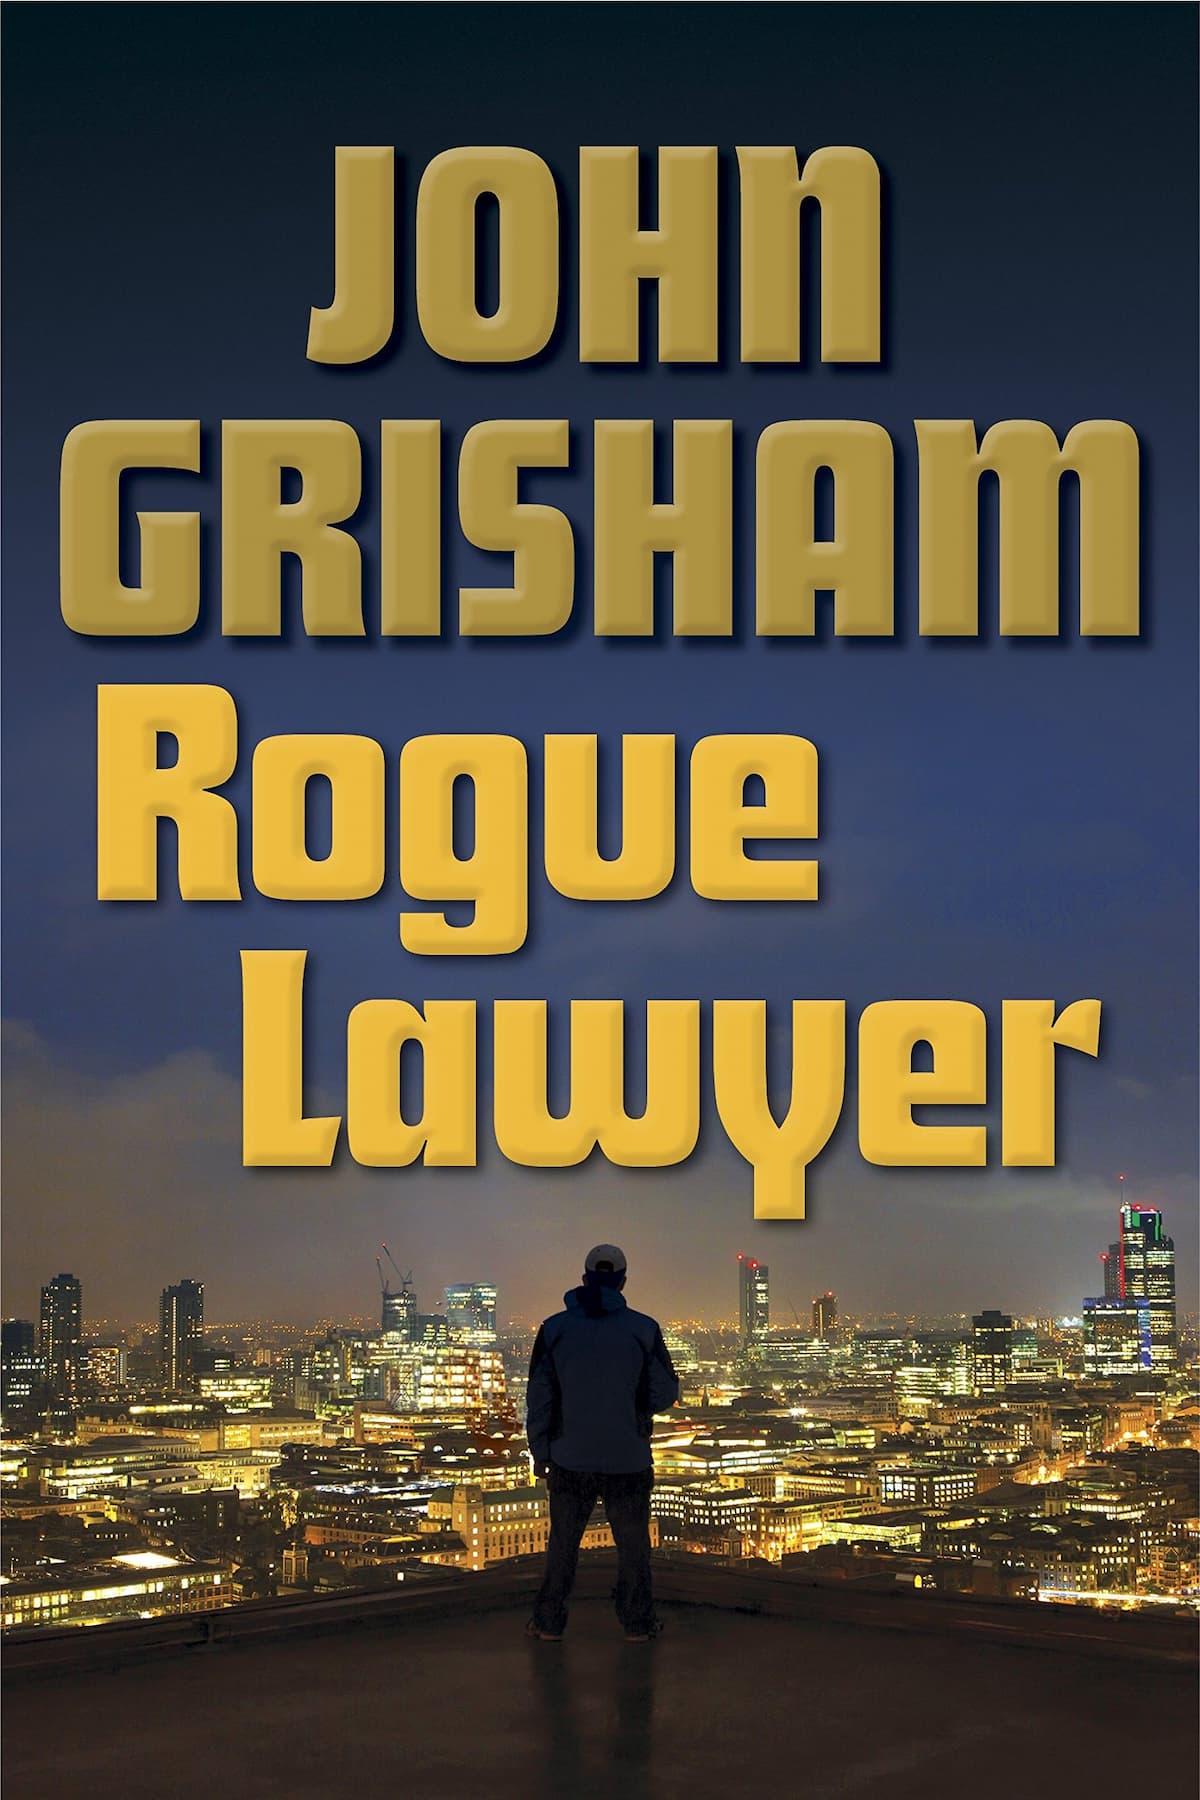 Rogue Lawyer - John Grisham (Rogue Lawyer Series Book 1) can be a great help to those who seek to recharge their energy levels during the holidays.